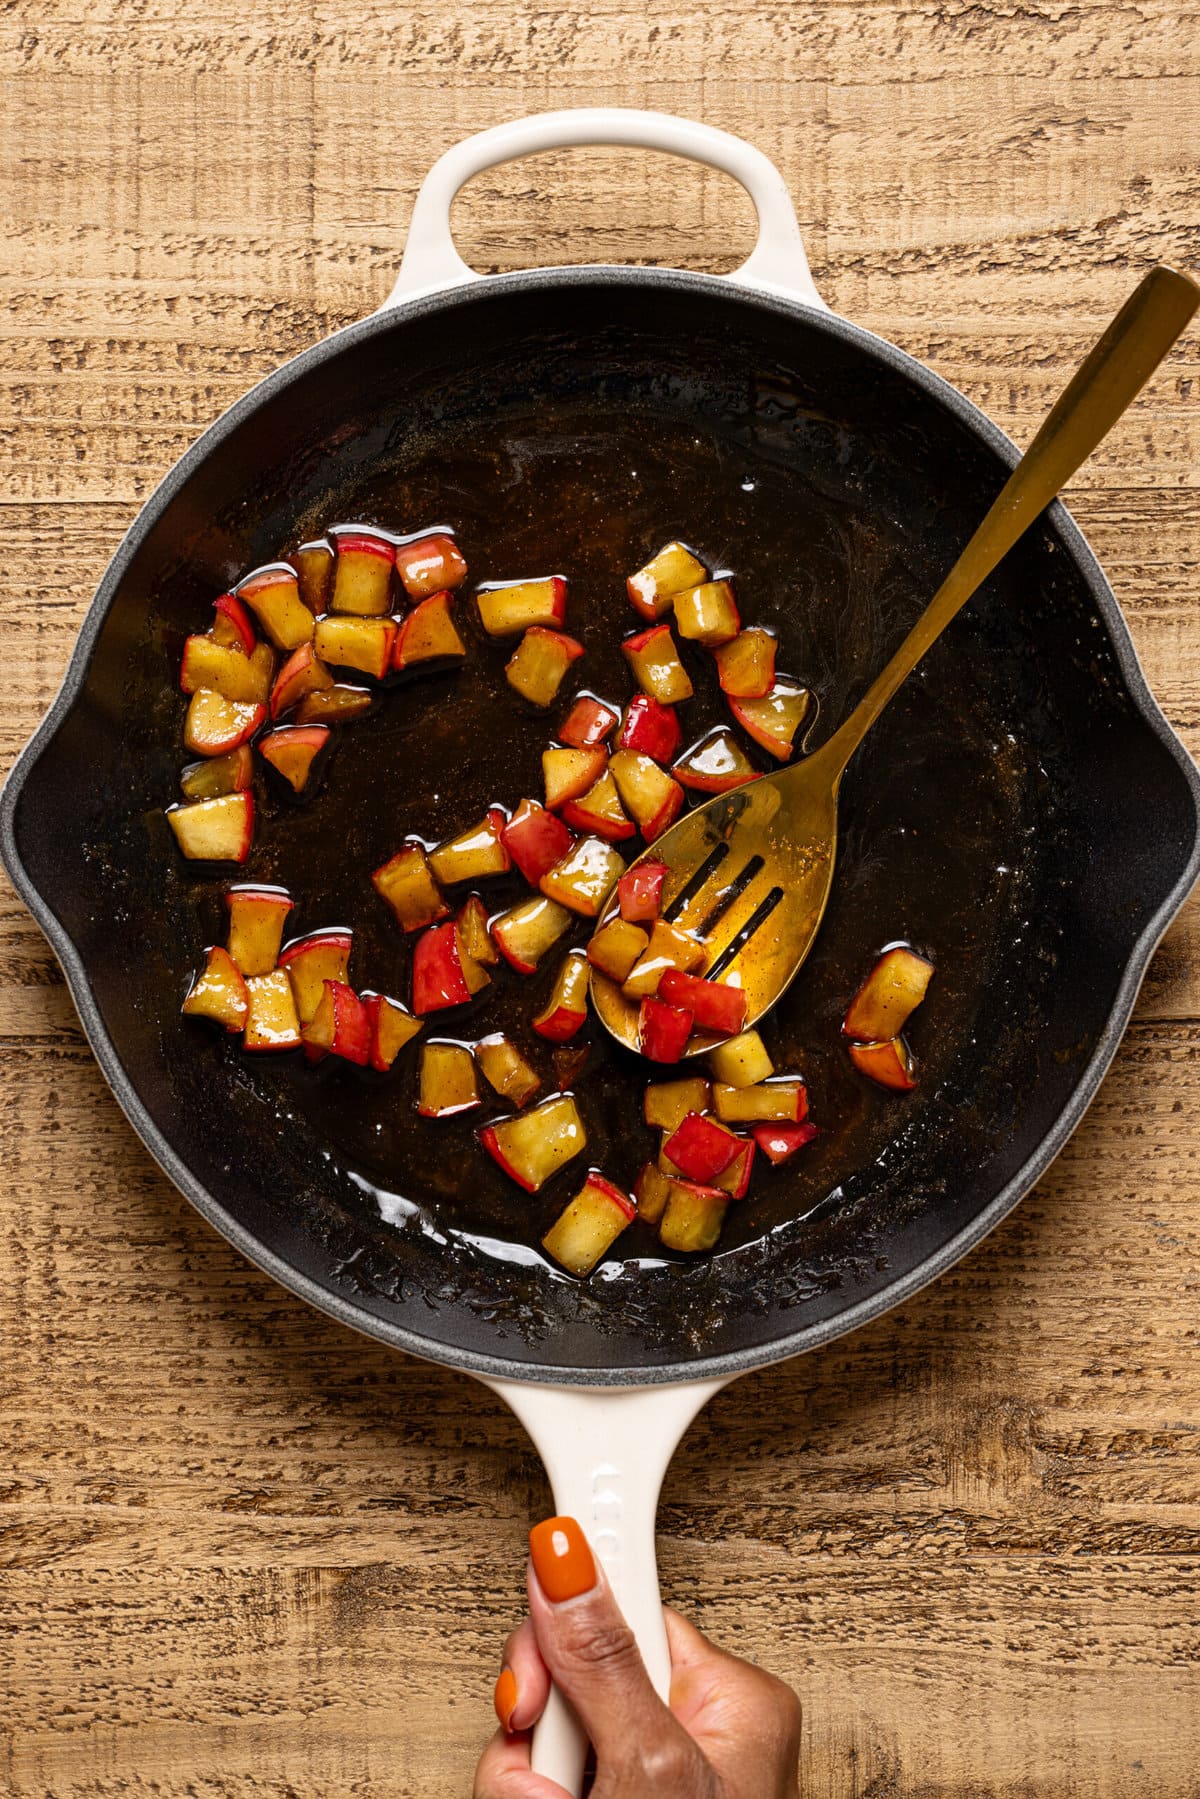 Sautéed apples in a white skillet on a brown wood table.